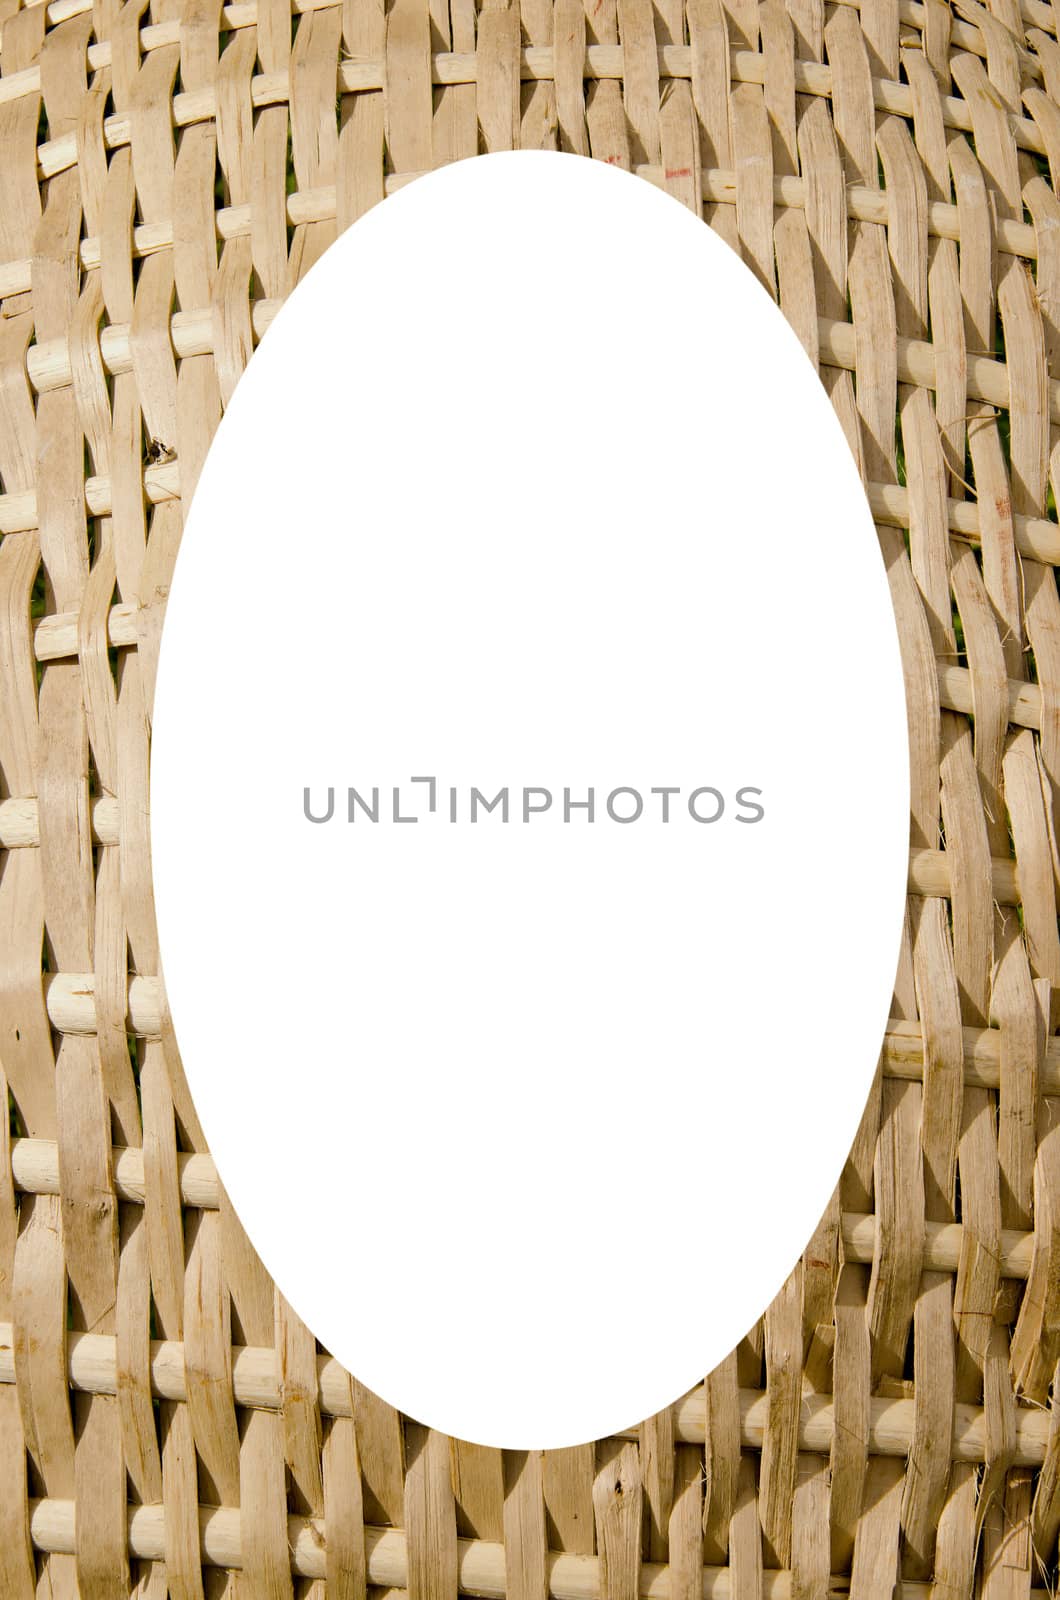 Wicker basket background and white oval in center by sauletas